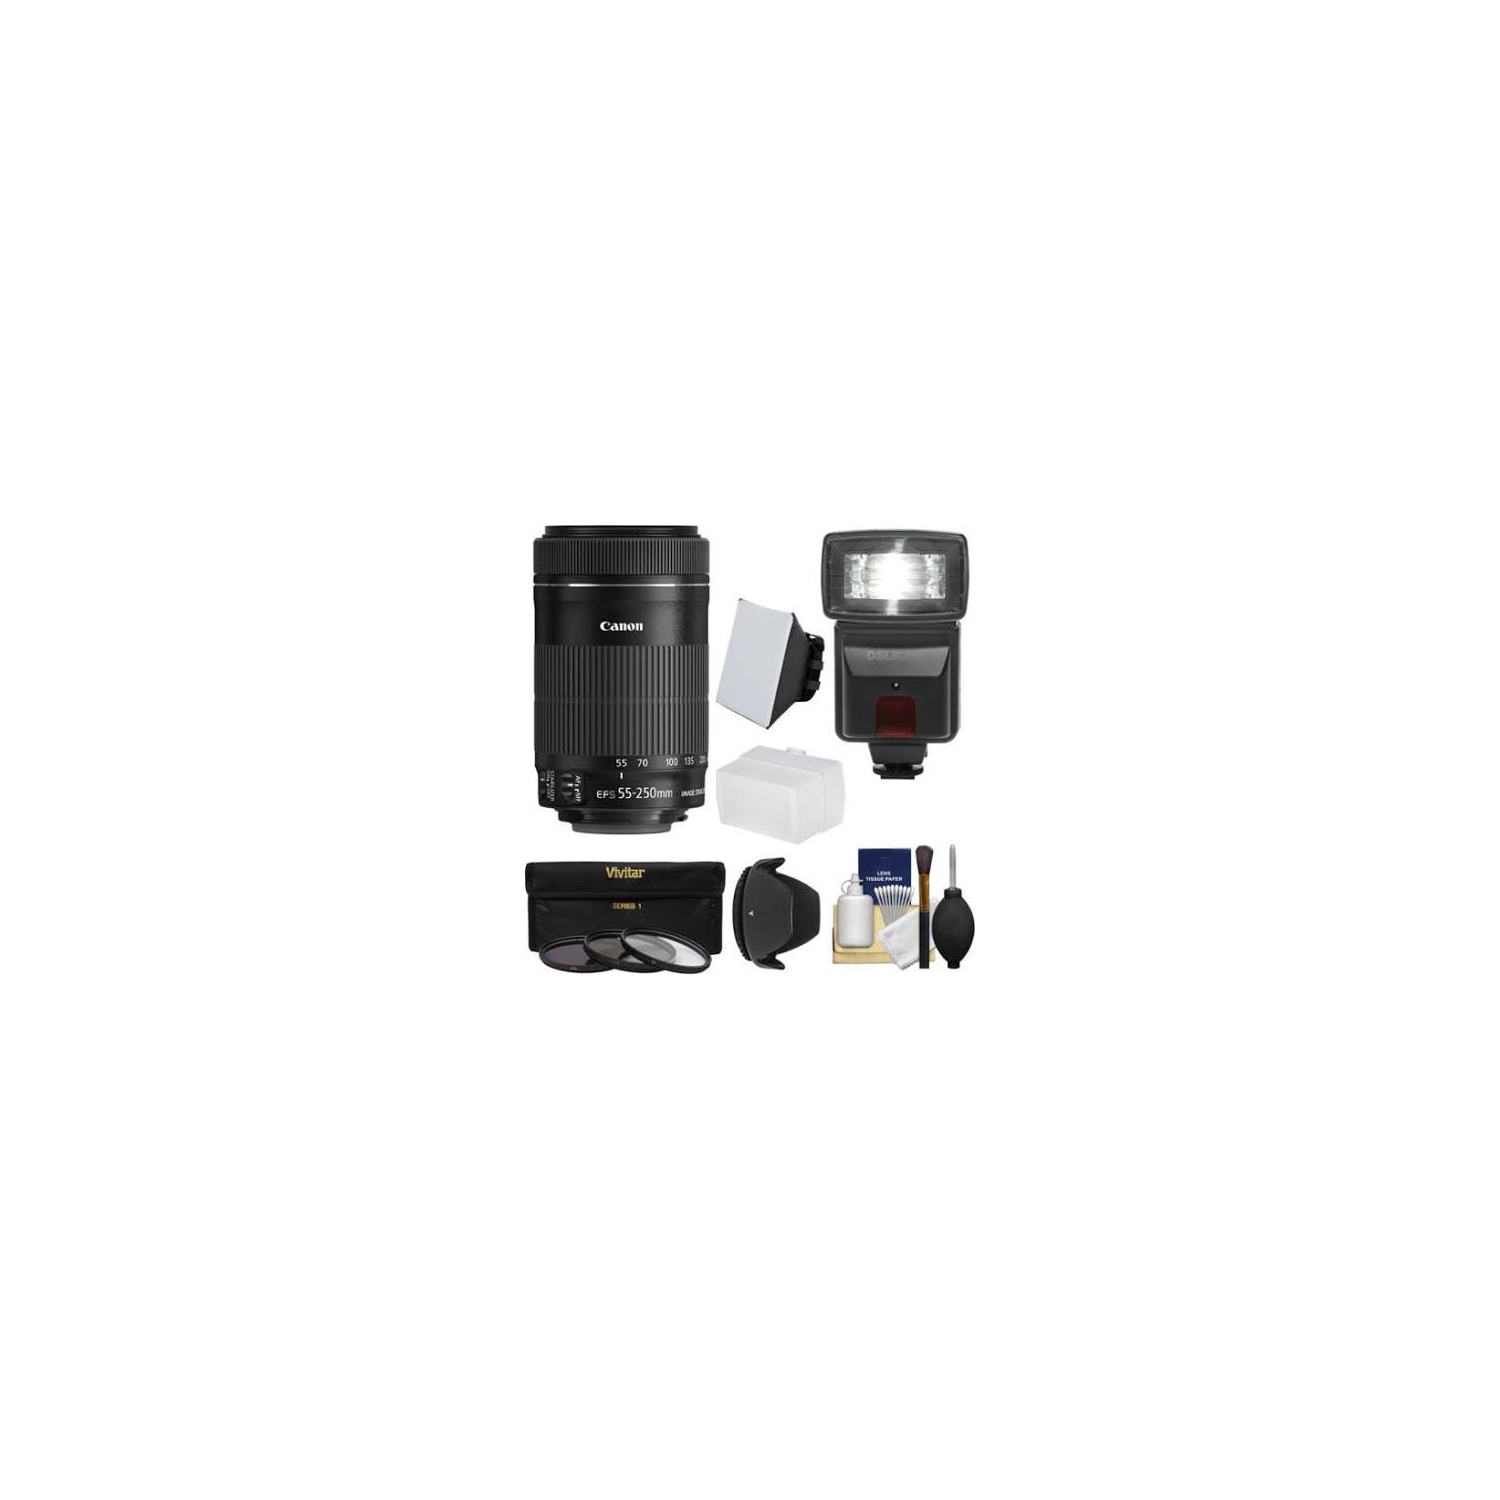 Canon EF-S 55-250mm f/4-5.6 IS STM Lens Zoom Lens with Flash 3 Filters Diffusers Hood Kit - US Version w/ Seller Warranty